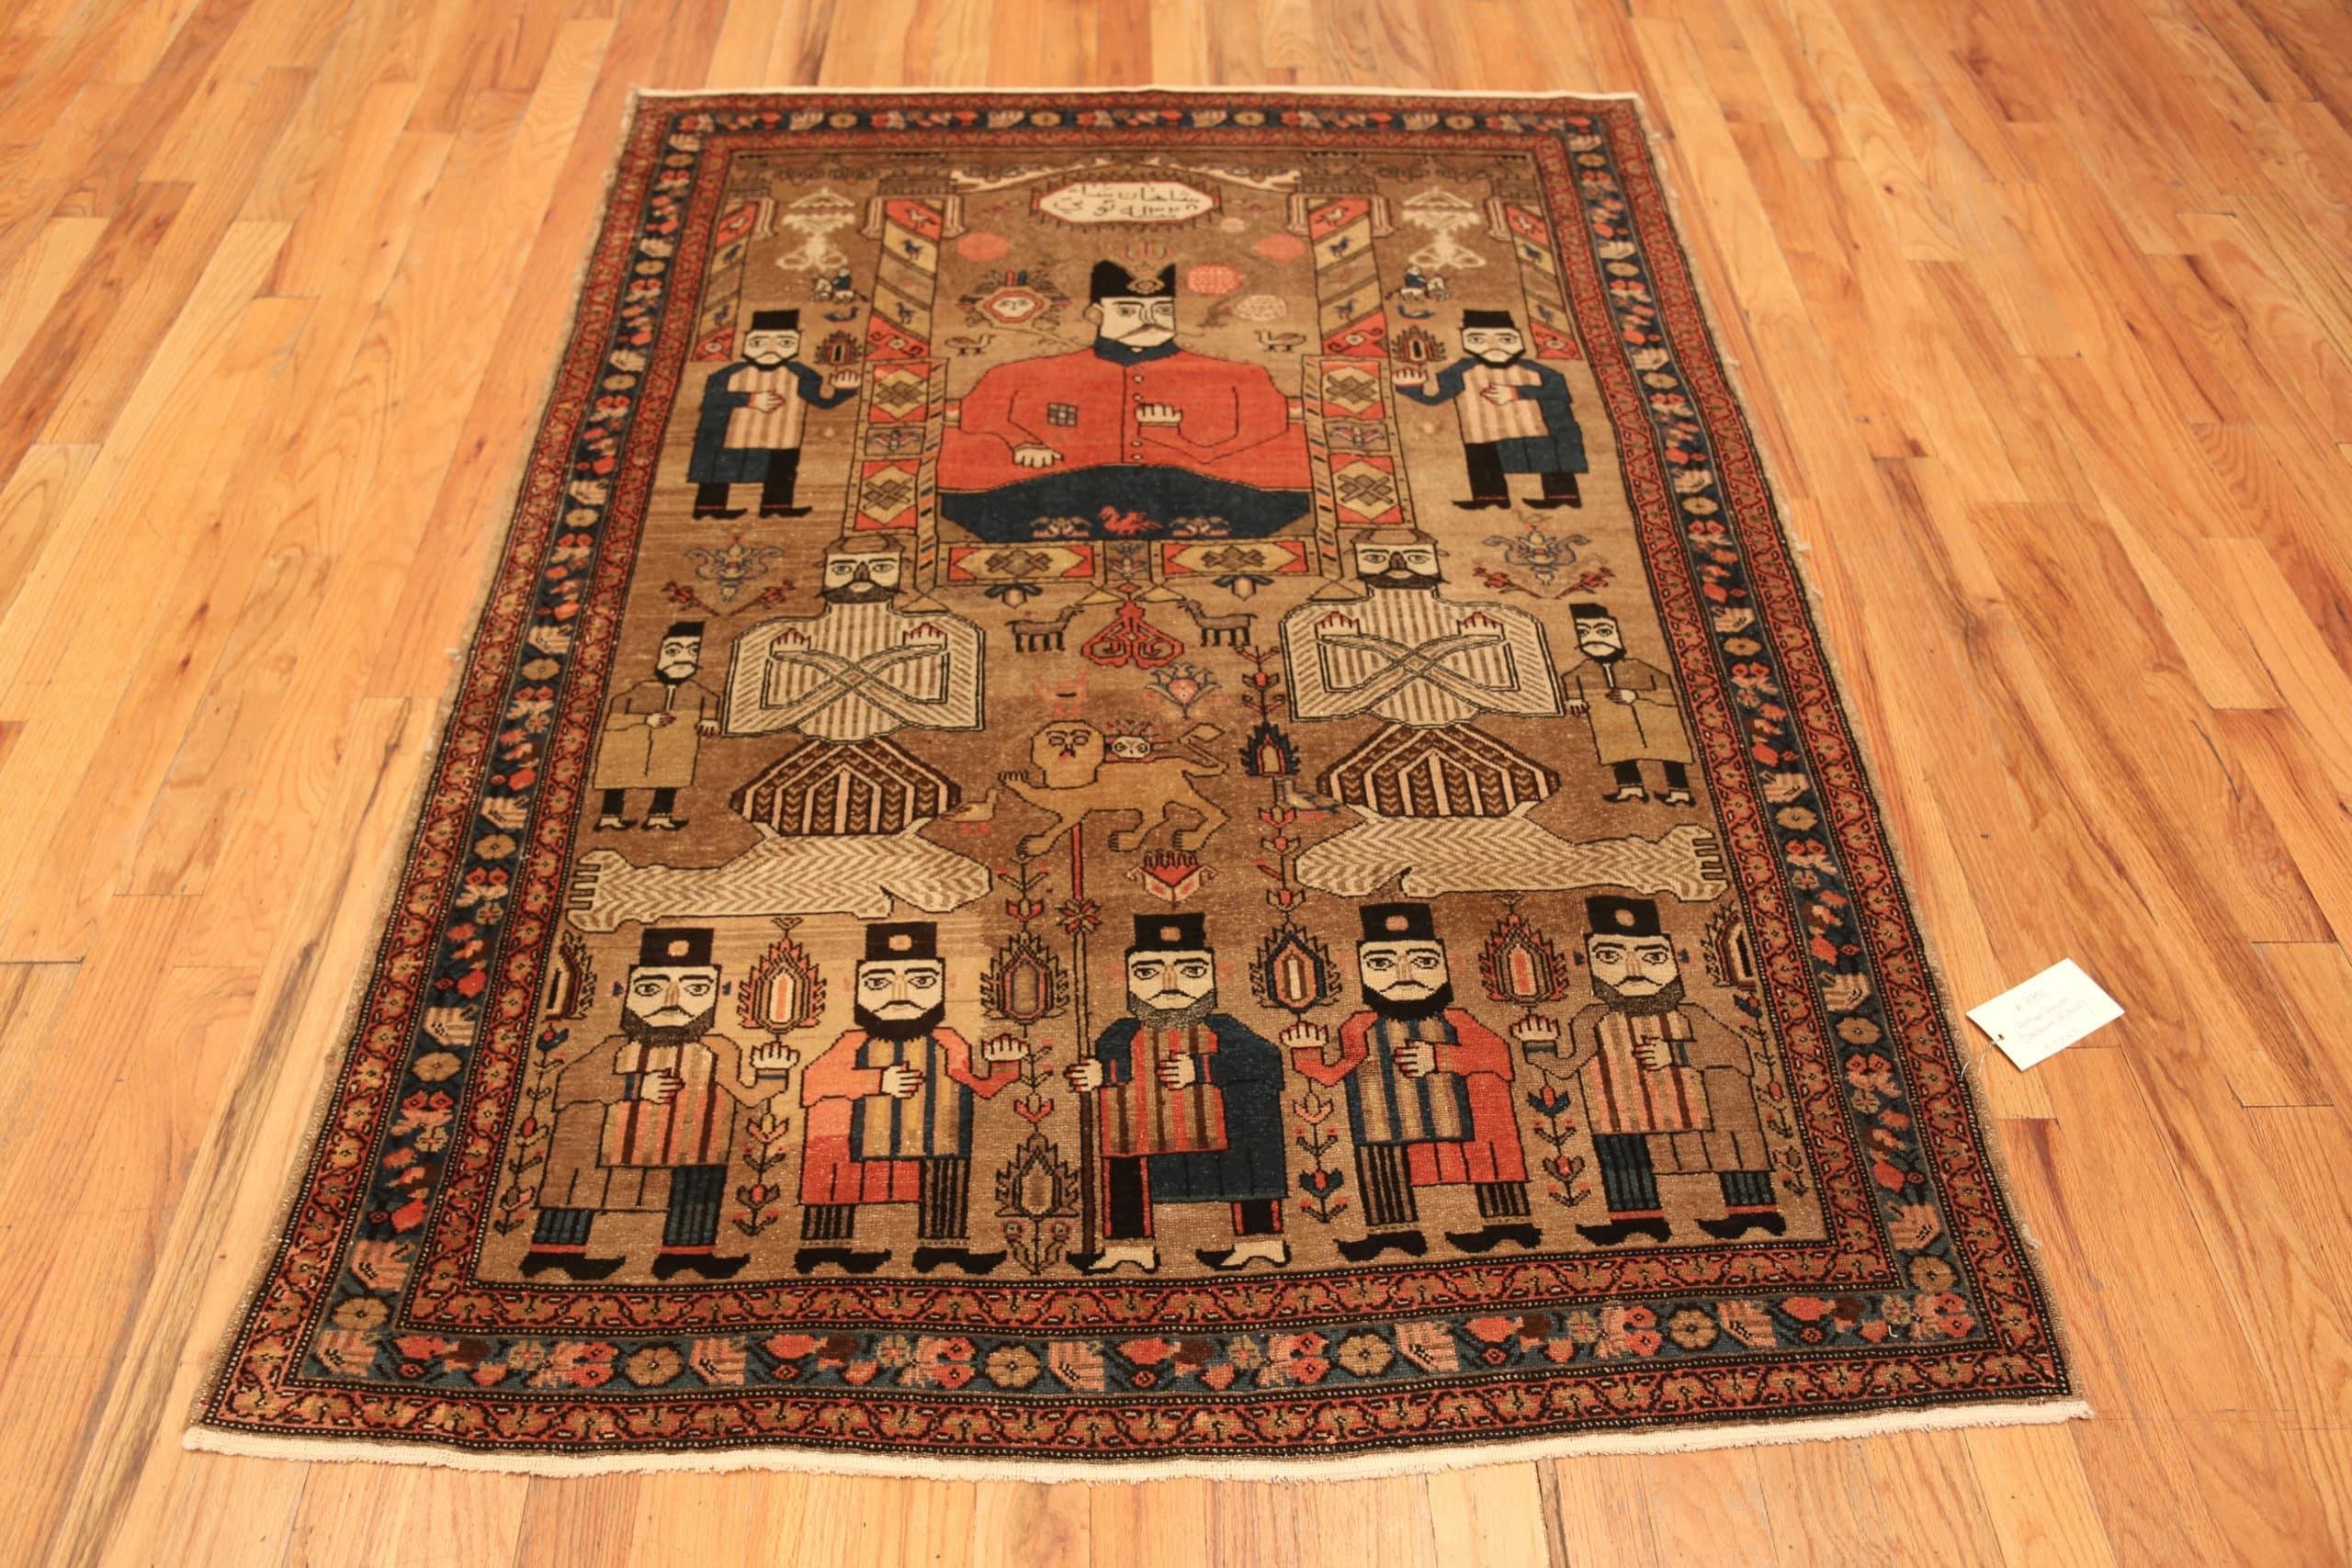 Antique Persian Pictorial Bakshaish Rug, Country of Origin / rug type: Persian rug, Circa date: 1910. Size: 4 ft 9 in x 6 ft 8 in (1.45 m x 2.03 m)



